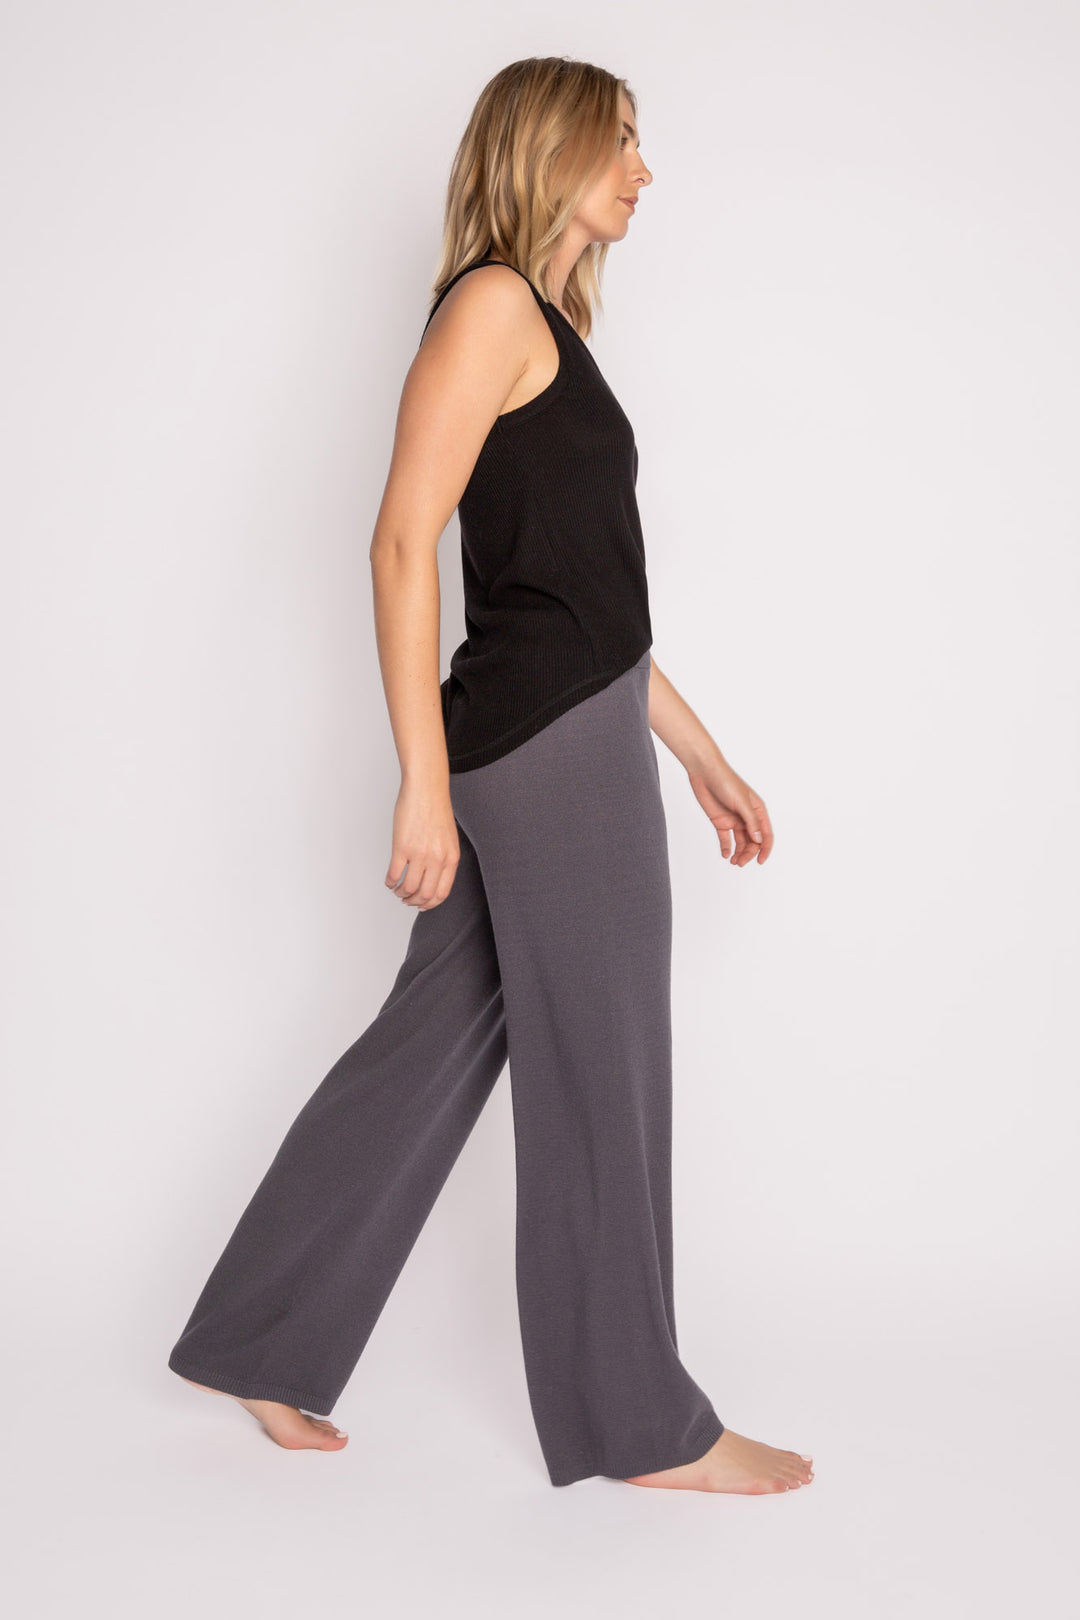 Sweater-knit lounge pant in charcoal with rib knit waistband (7231886000228)